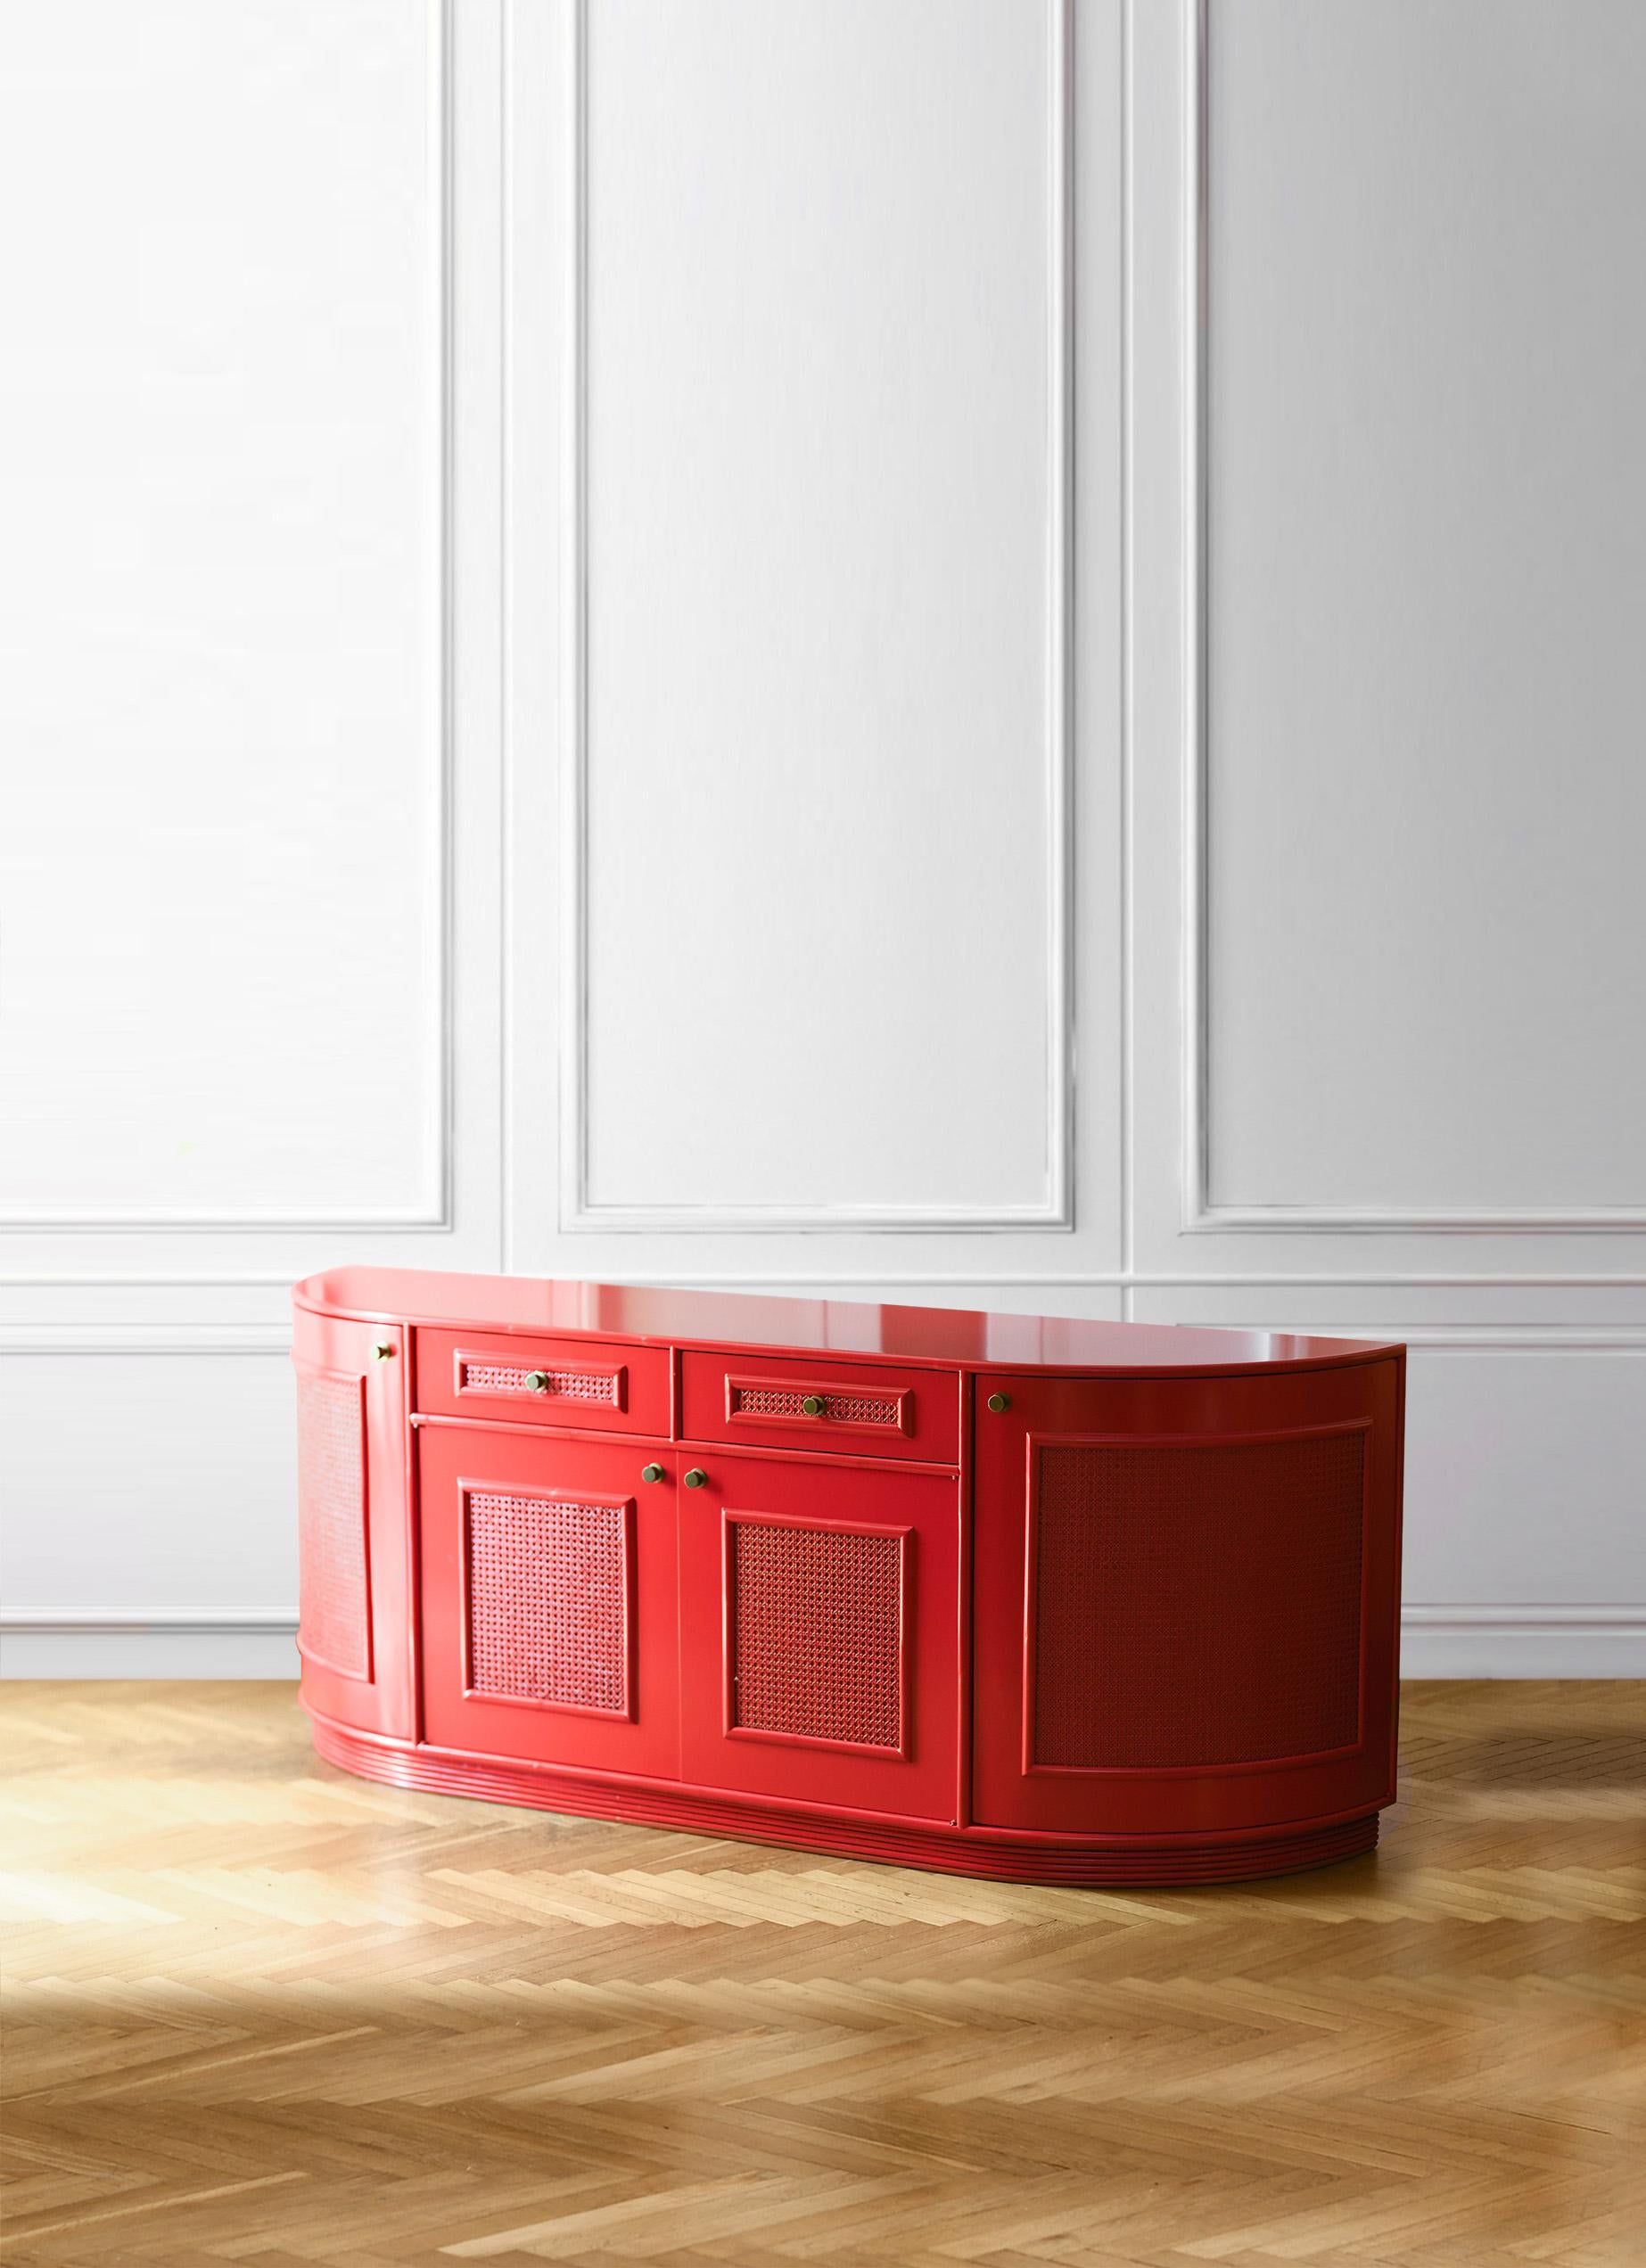 Large red China lacquered sideboard from the 80s
Product details
Storage unit with doors, drawers and internal shelves
Dimensions: 205L x 80H x 51D cm.